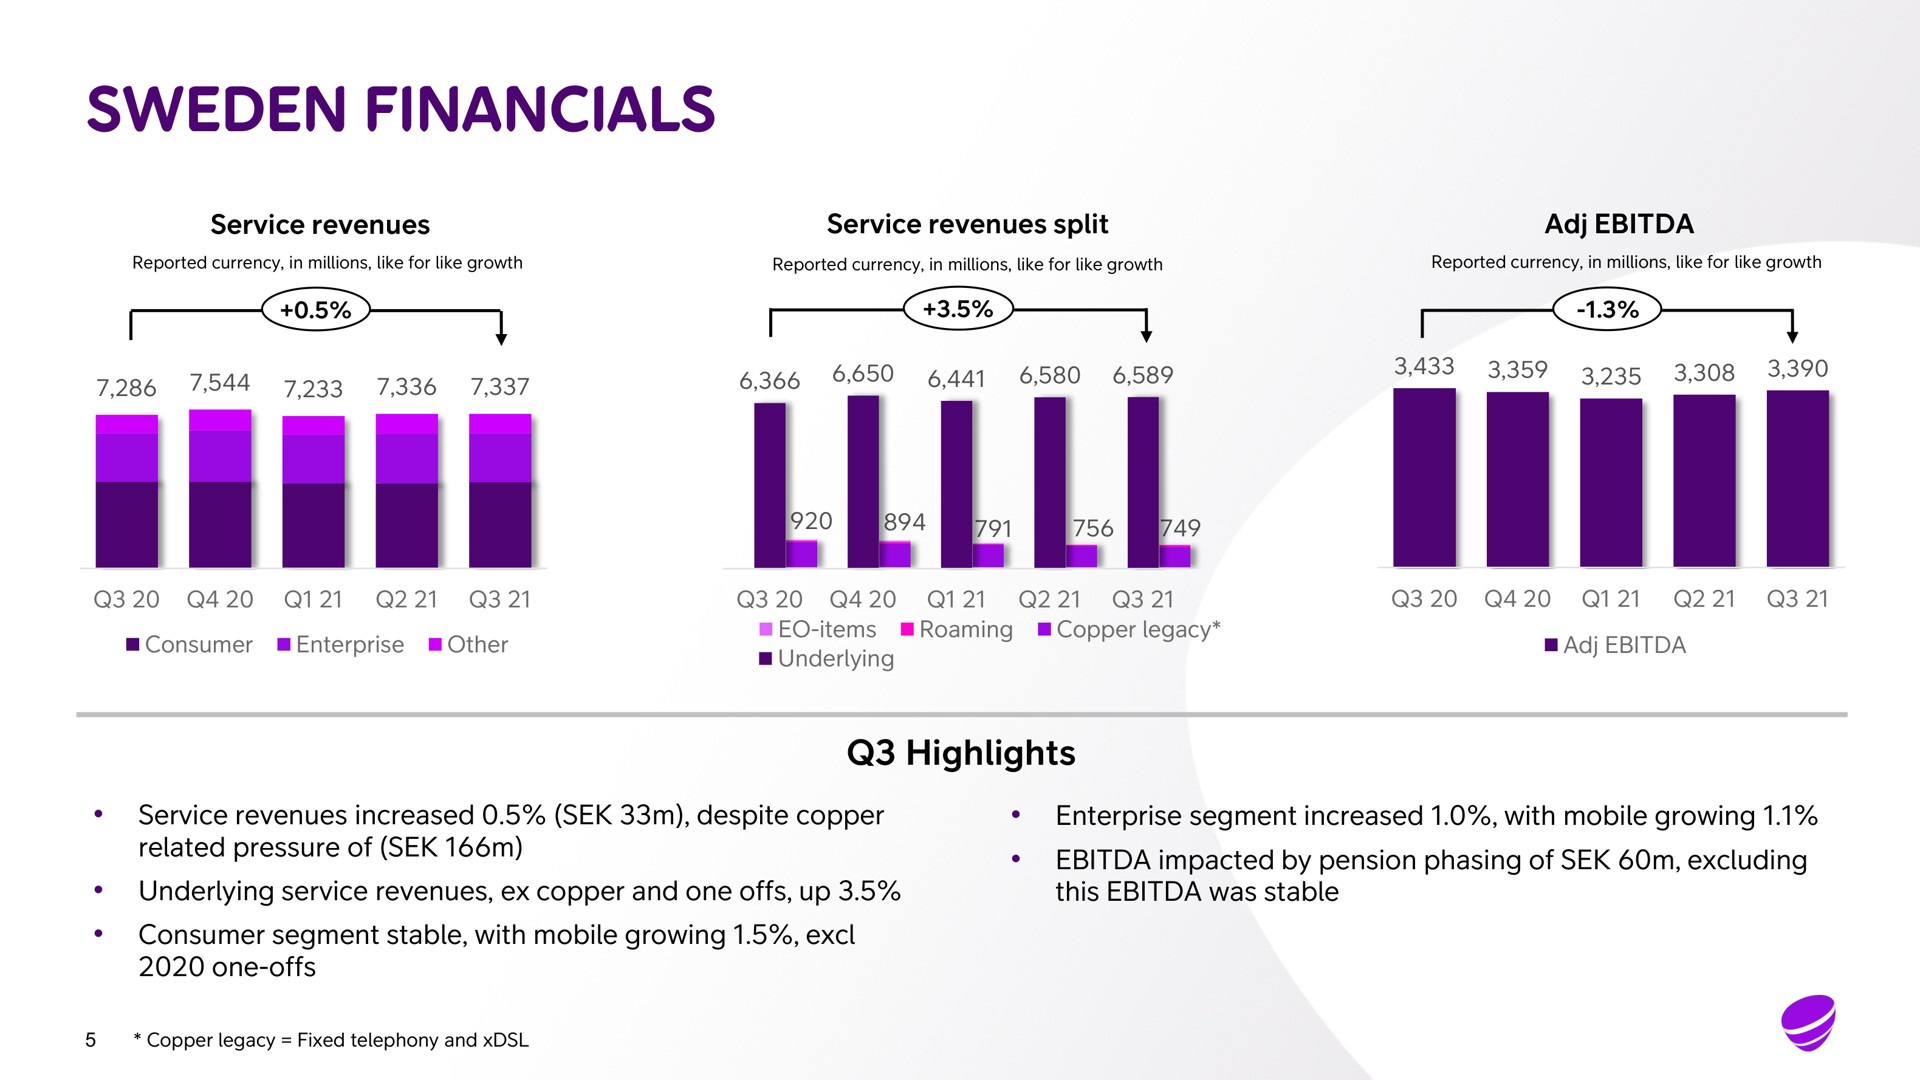 service revenues service revenues split highlights service revenues increased despite copper related pressure of underlying service revenues copper and one offs up consumer segment stable with mobile growing one offs enterprise segment increased with mobile growing impacted by pension phasing of excluding this was stable other tal roaming | Telia Company